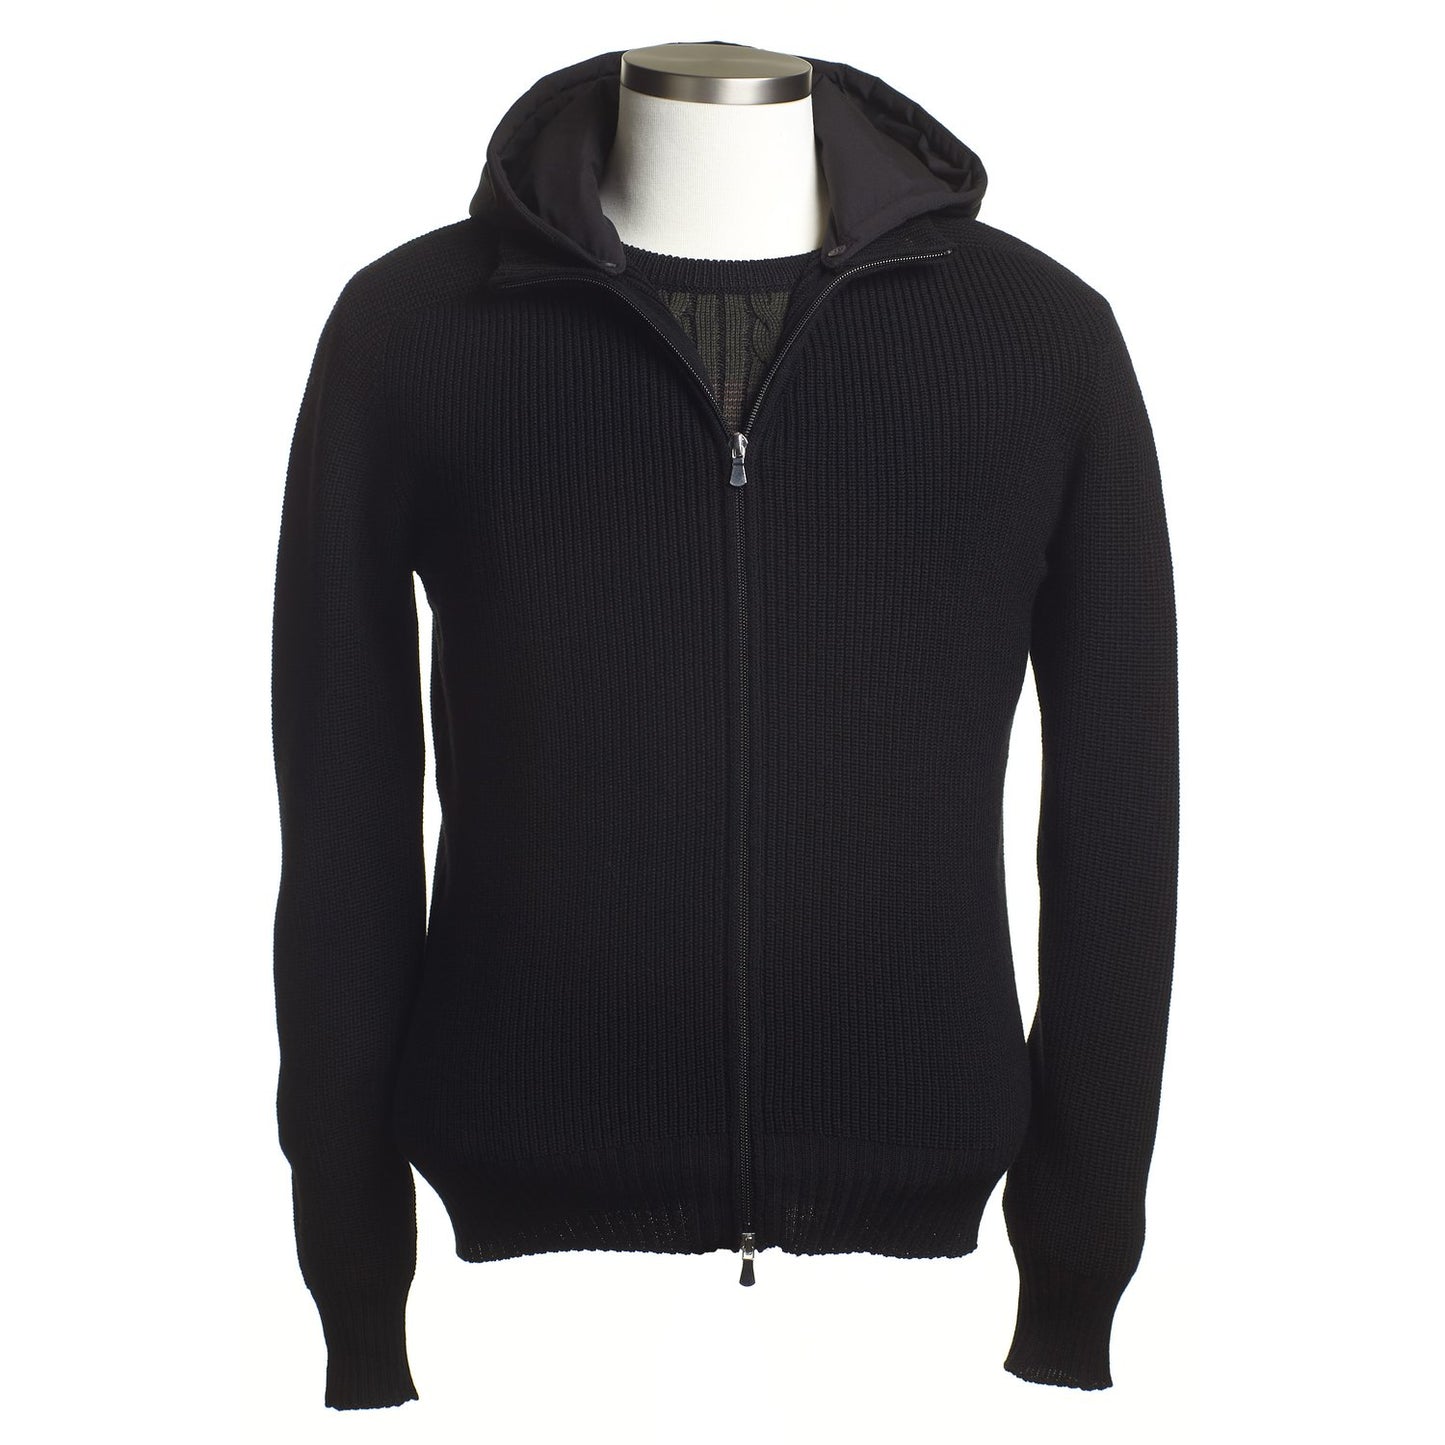 Gran Sasso Water-Resistant Wool Knit Sweater Jacket with Removable Hoodie in Black